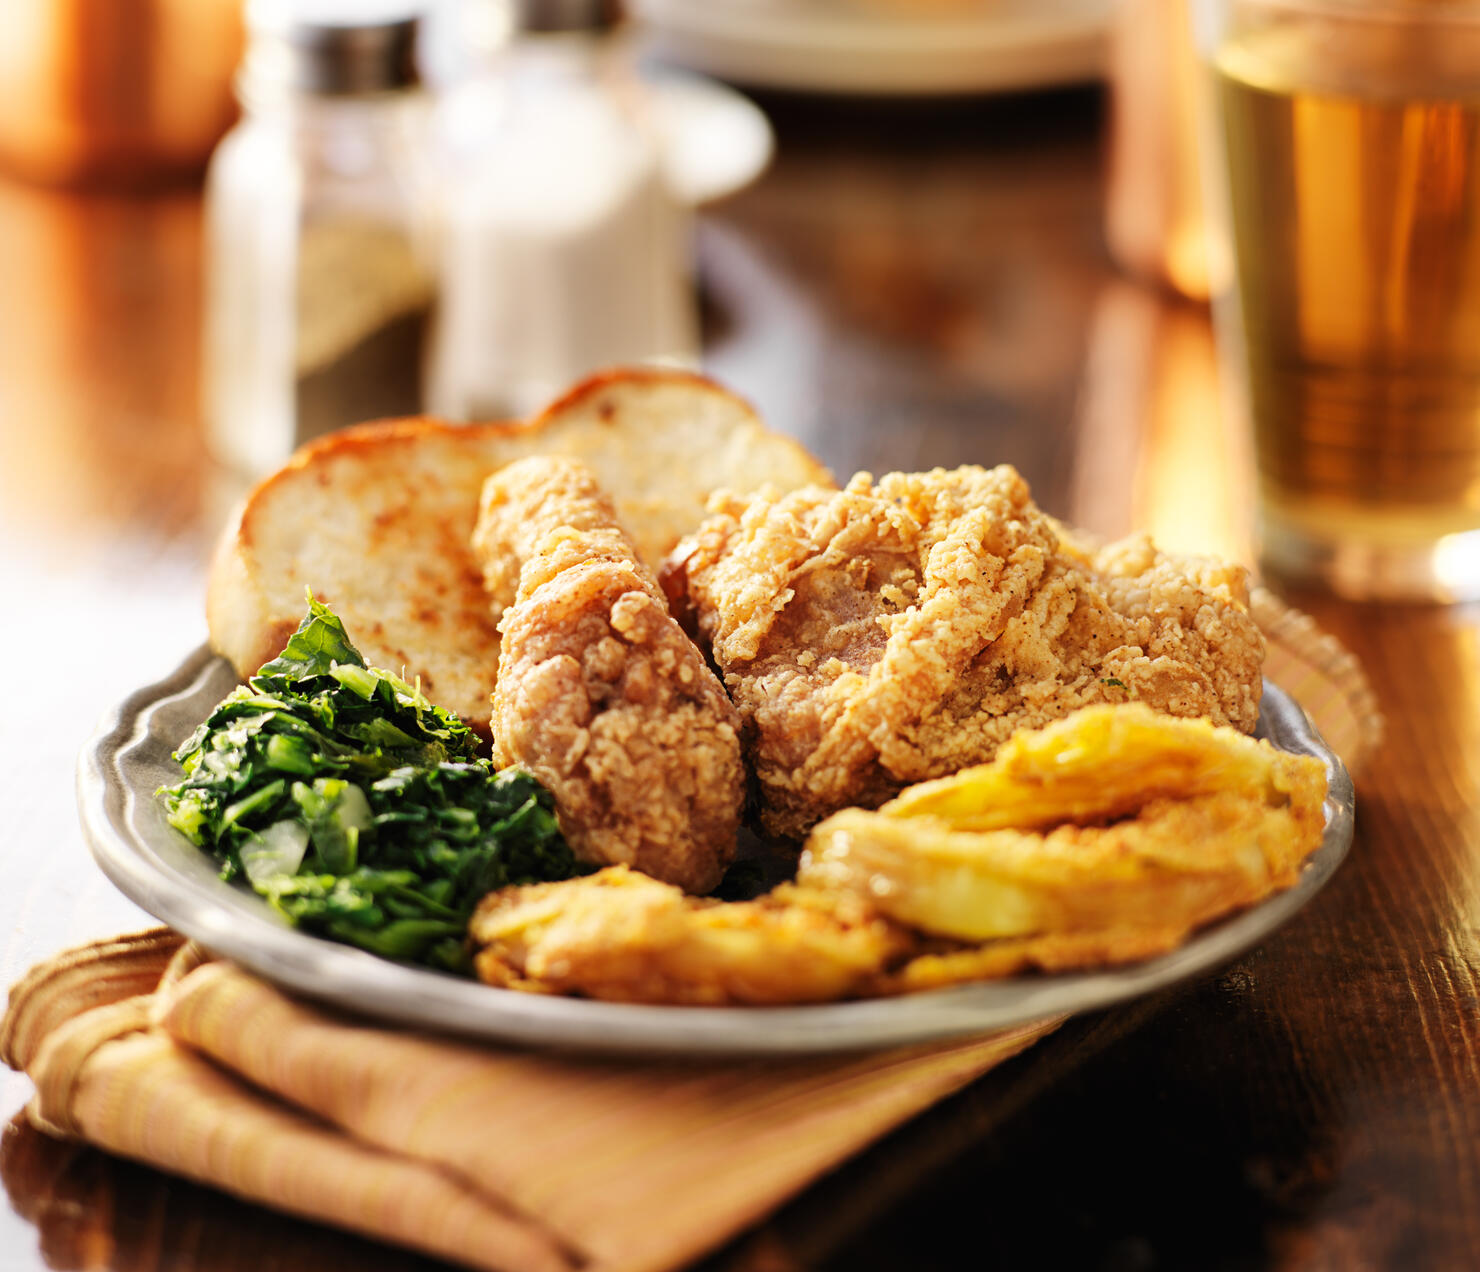 southern soul food with fried chicken and collard greens